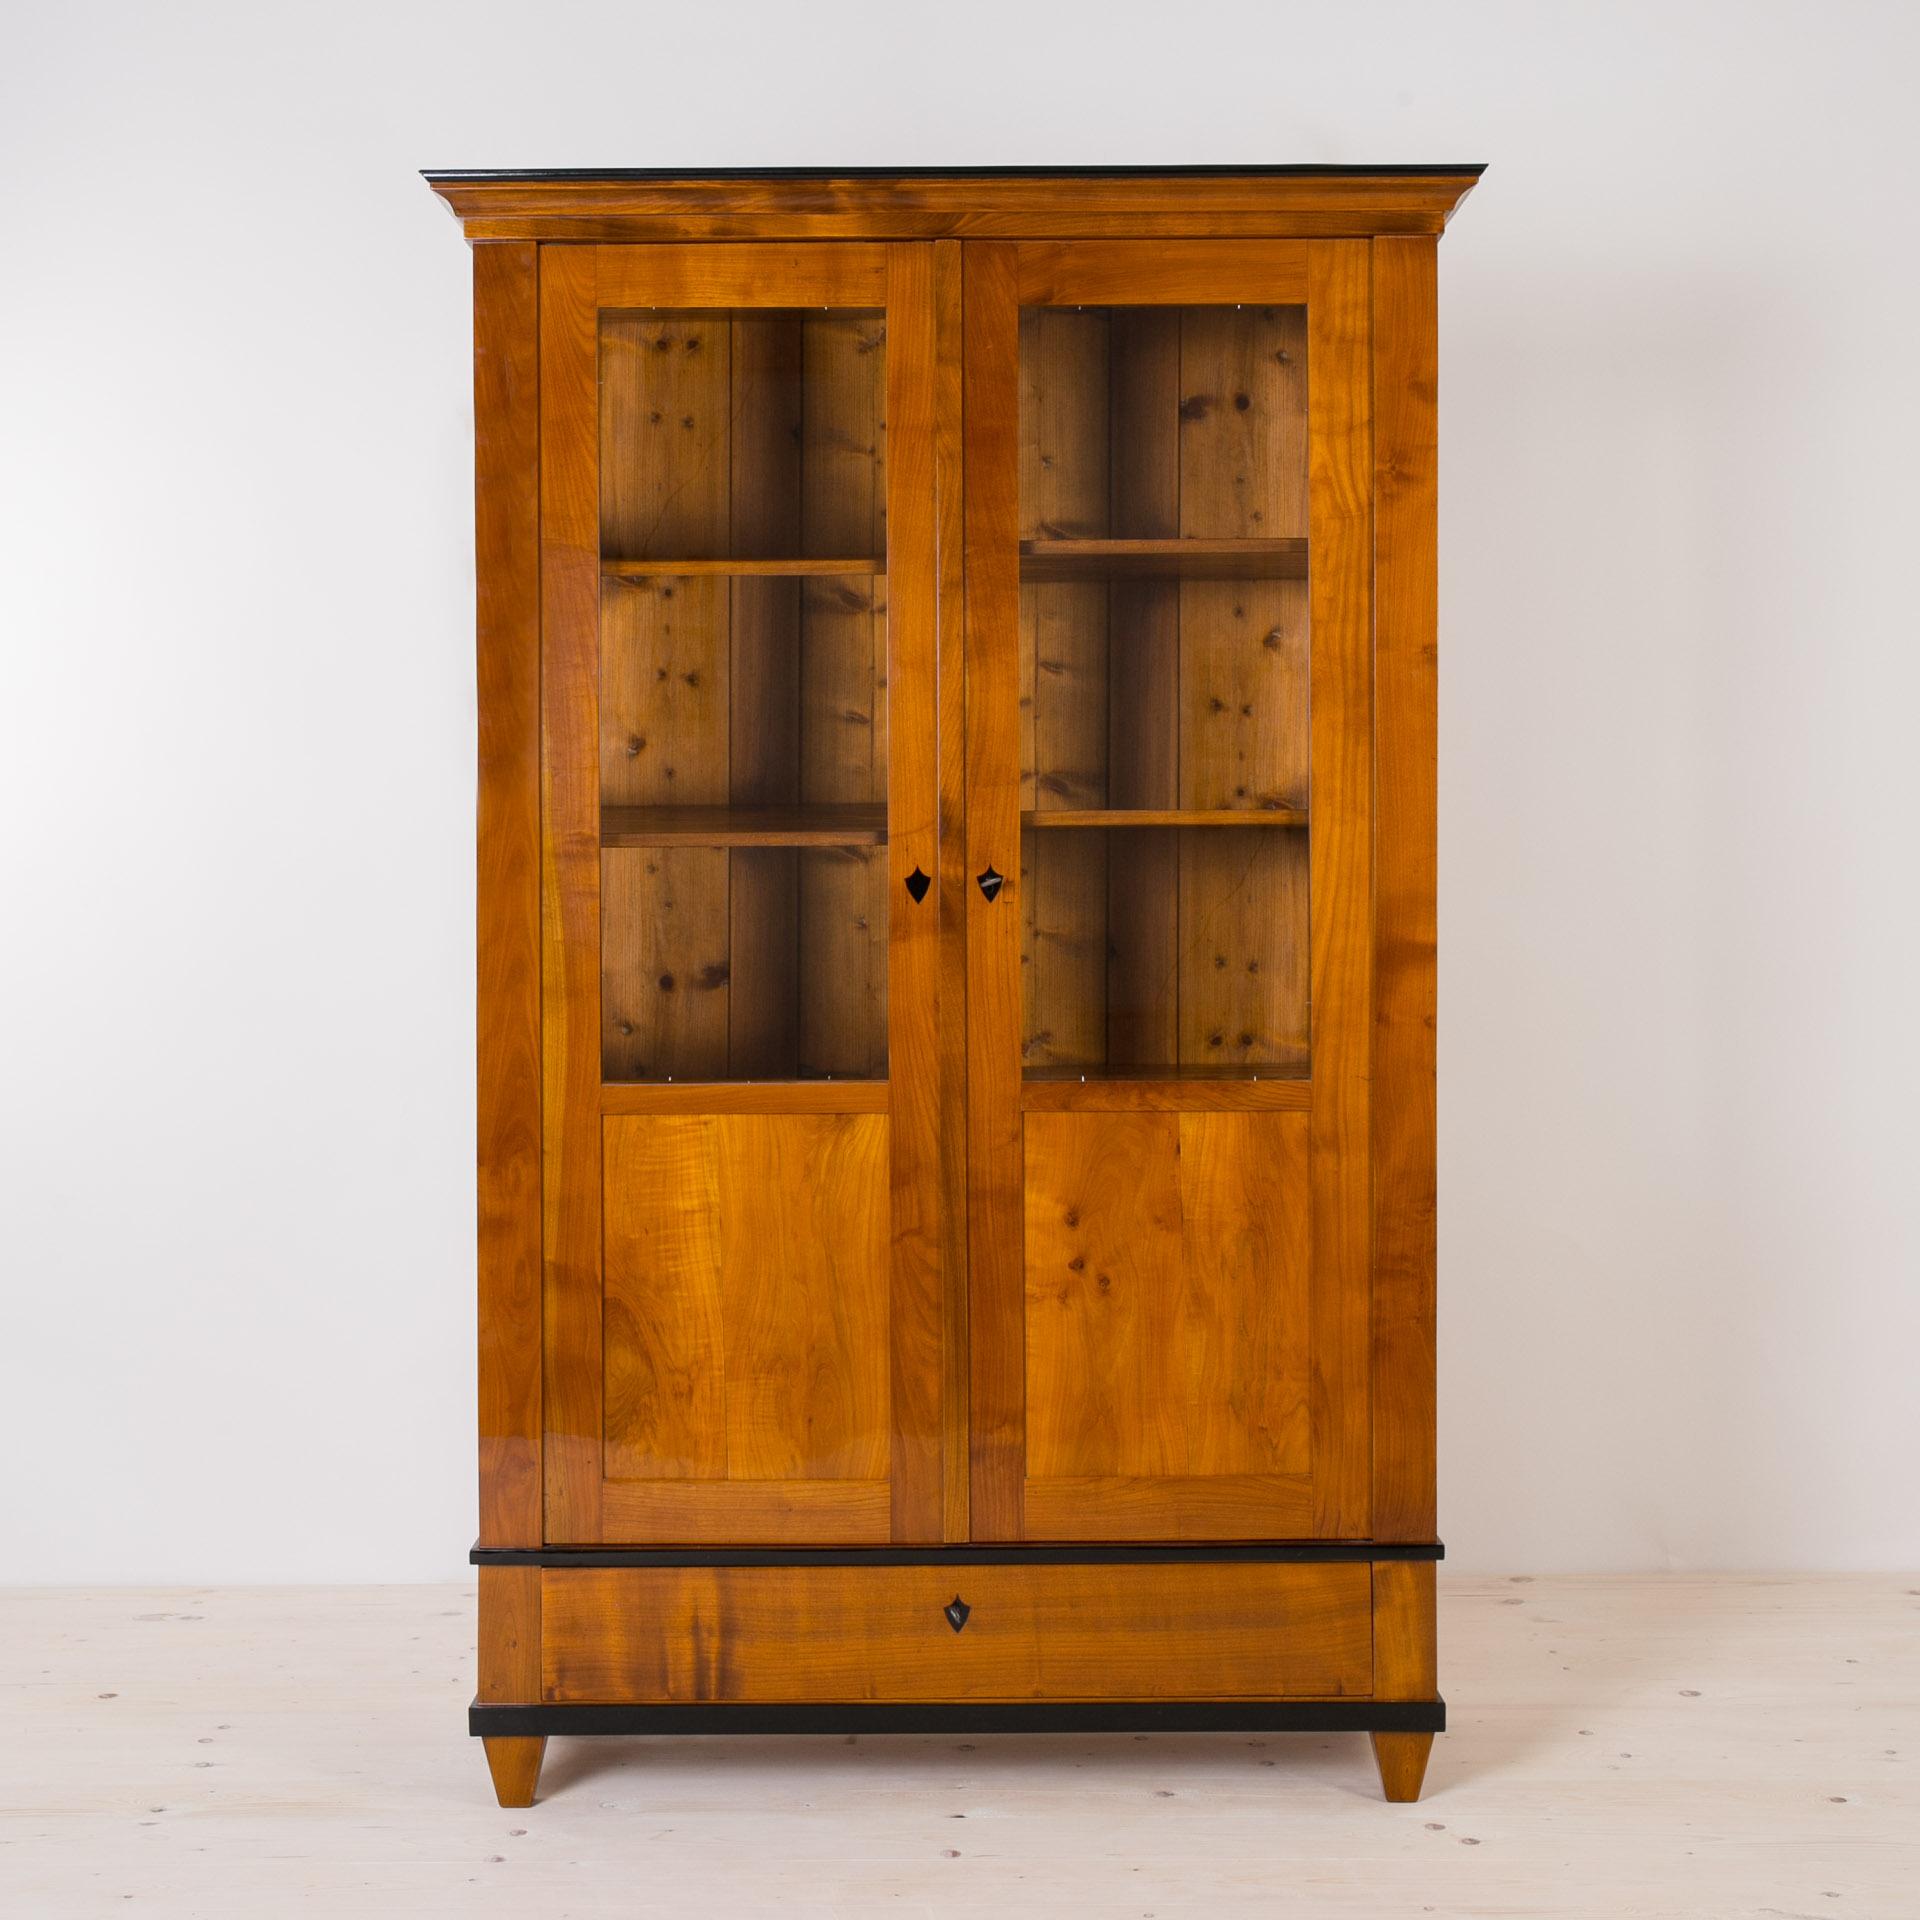 This beautiful cherrywood vitrine comes from Germany and was made in 19th century (the Biedermeier period). The construction is made of solid cherrywood. The piece features 3 practical shelves and one spacious drawer below the main section. It is